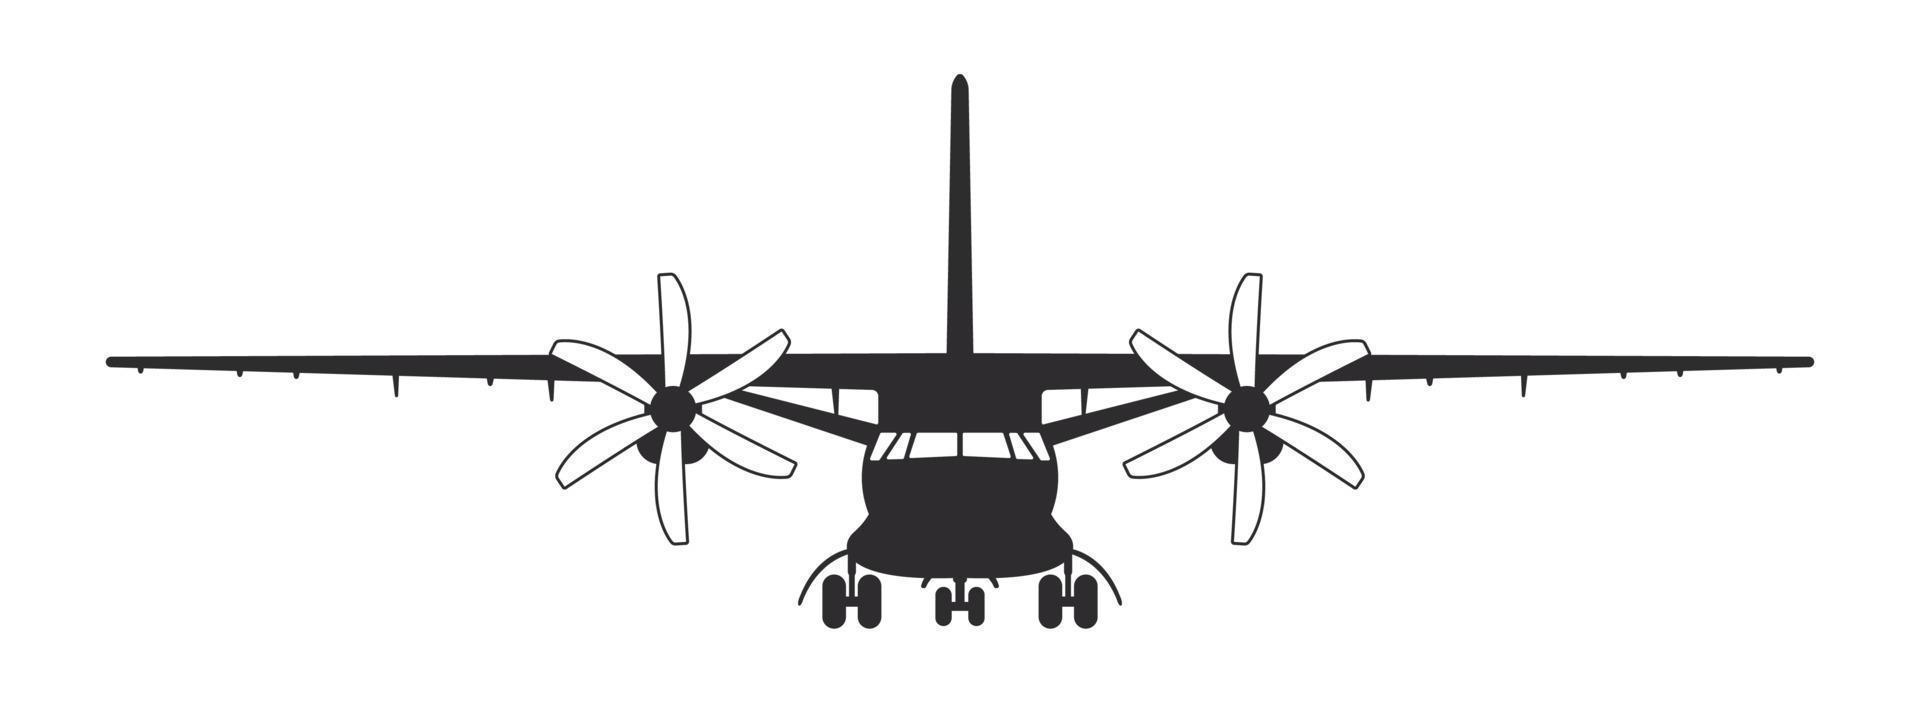 Plane. Cargo propeller plane. Airplane silhouette front view. Vector image